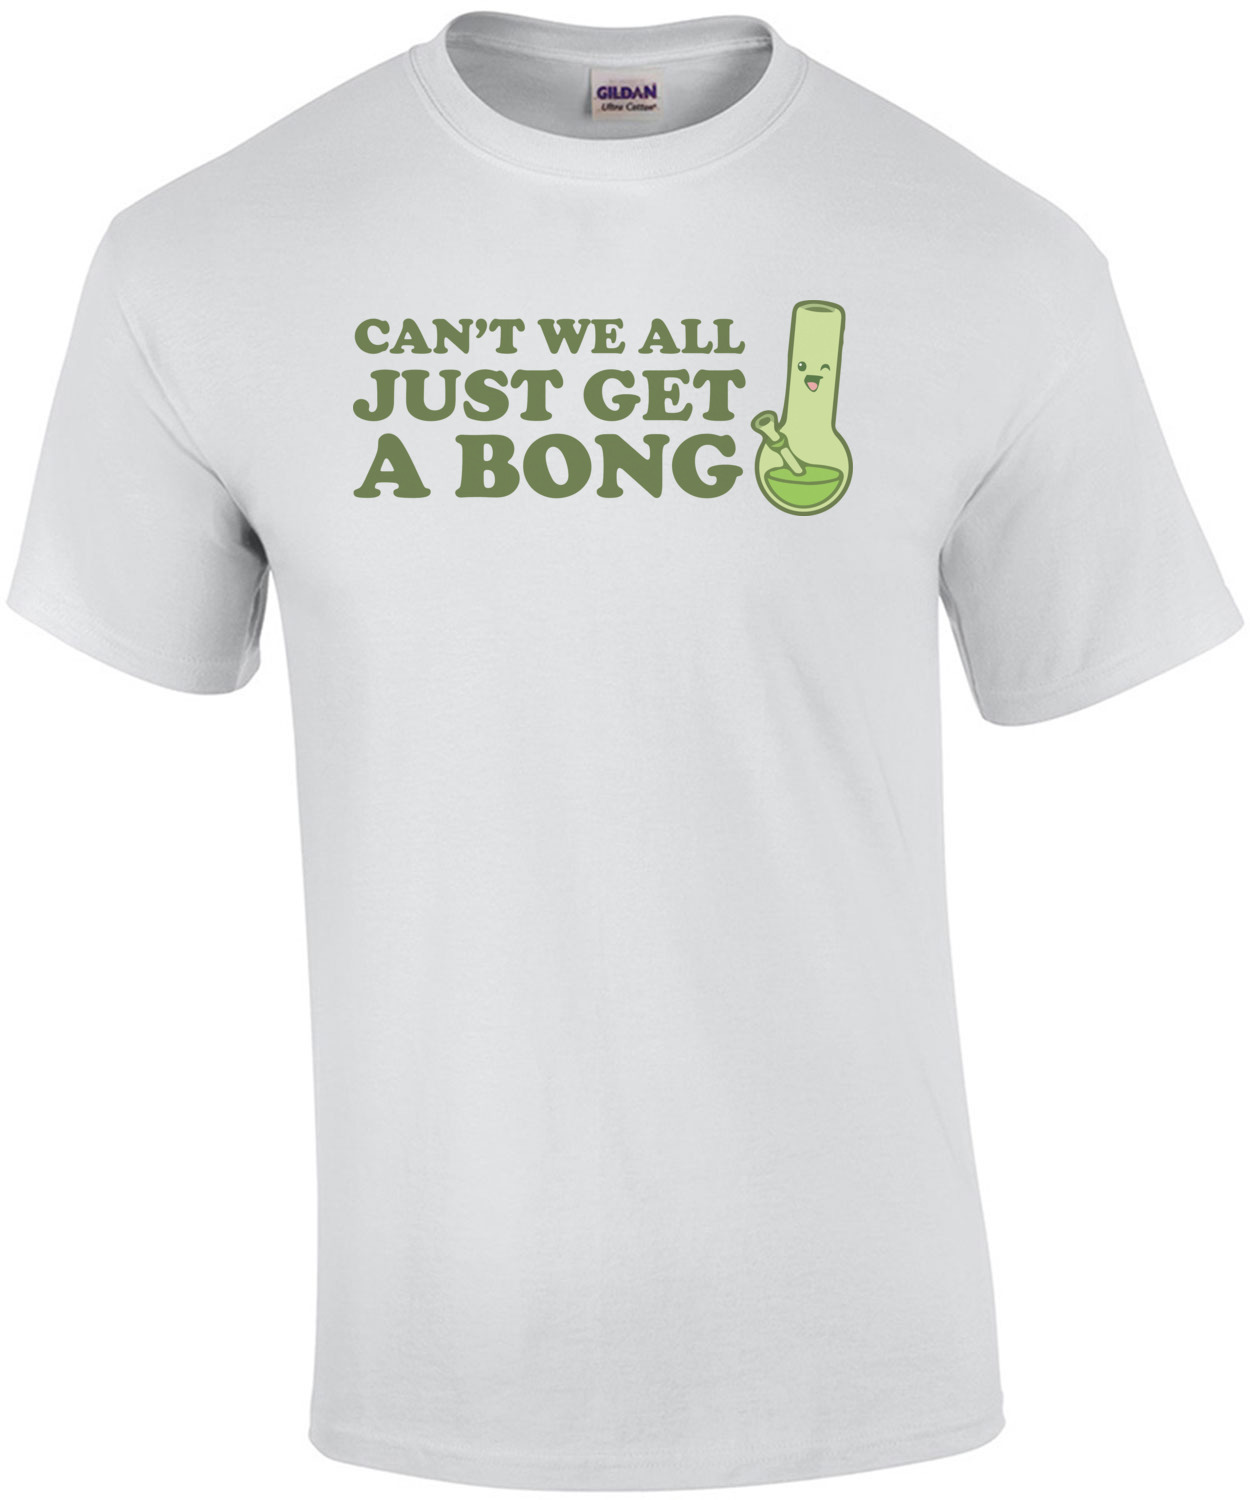 Child Cotton T-Shirt Lovely Long-Sleeved Tops Cant We All Just Get A Bong White